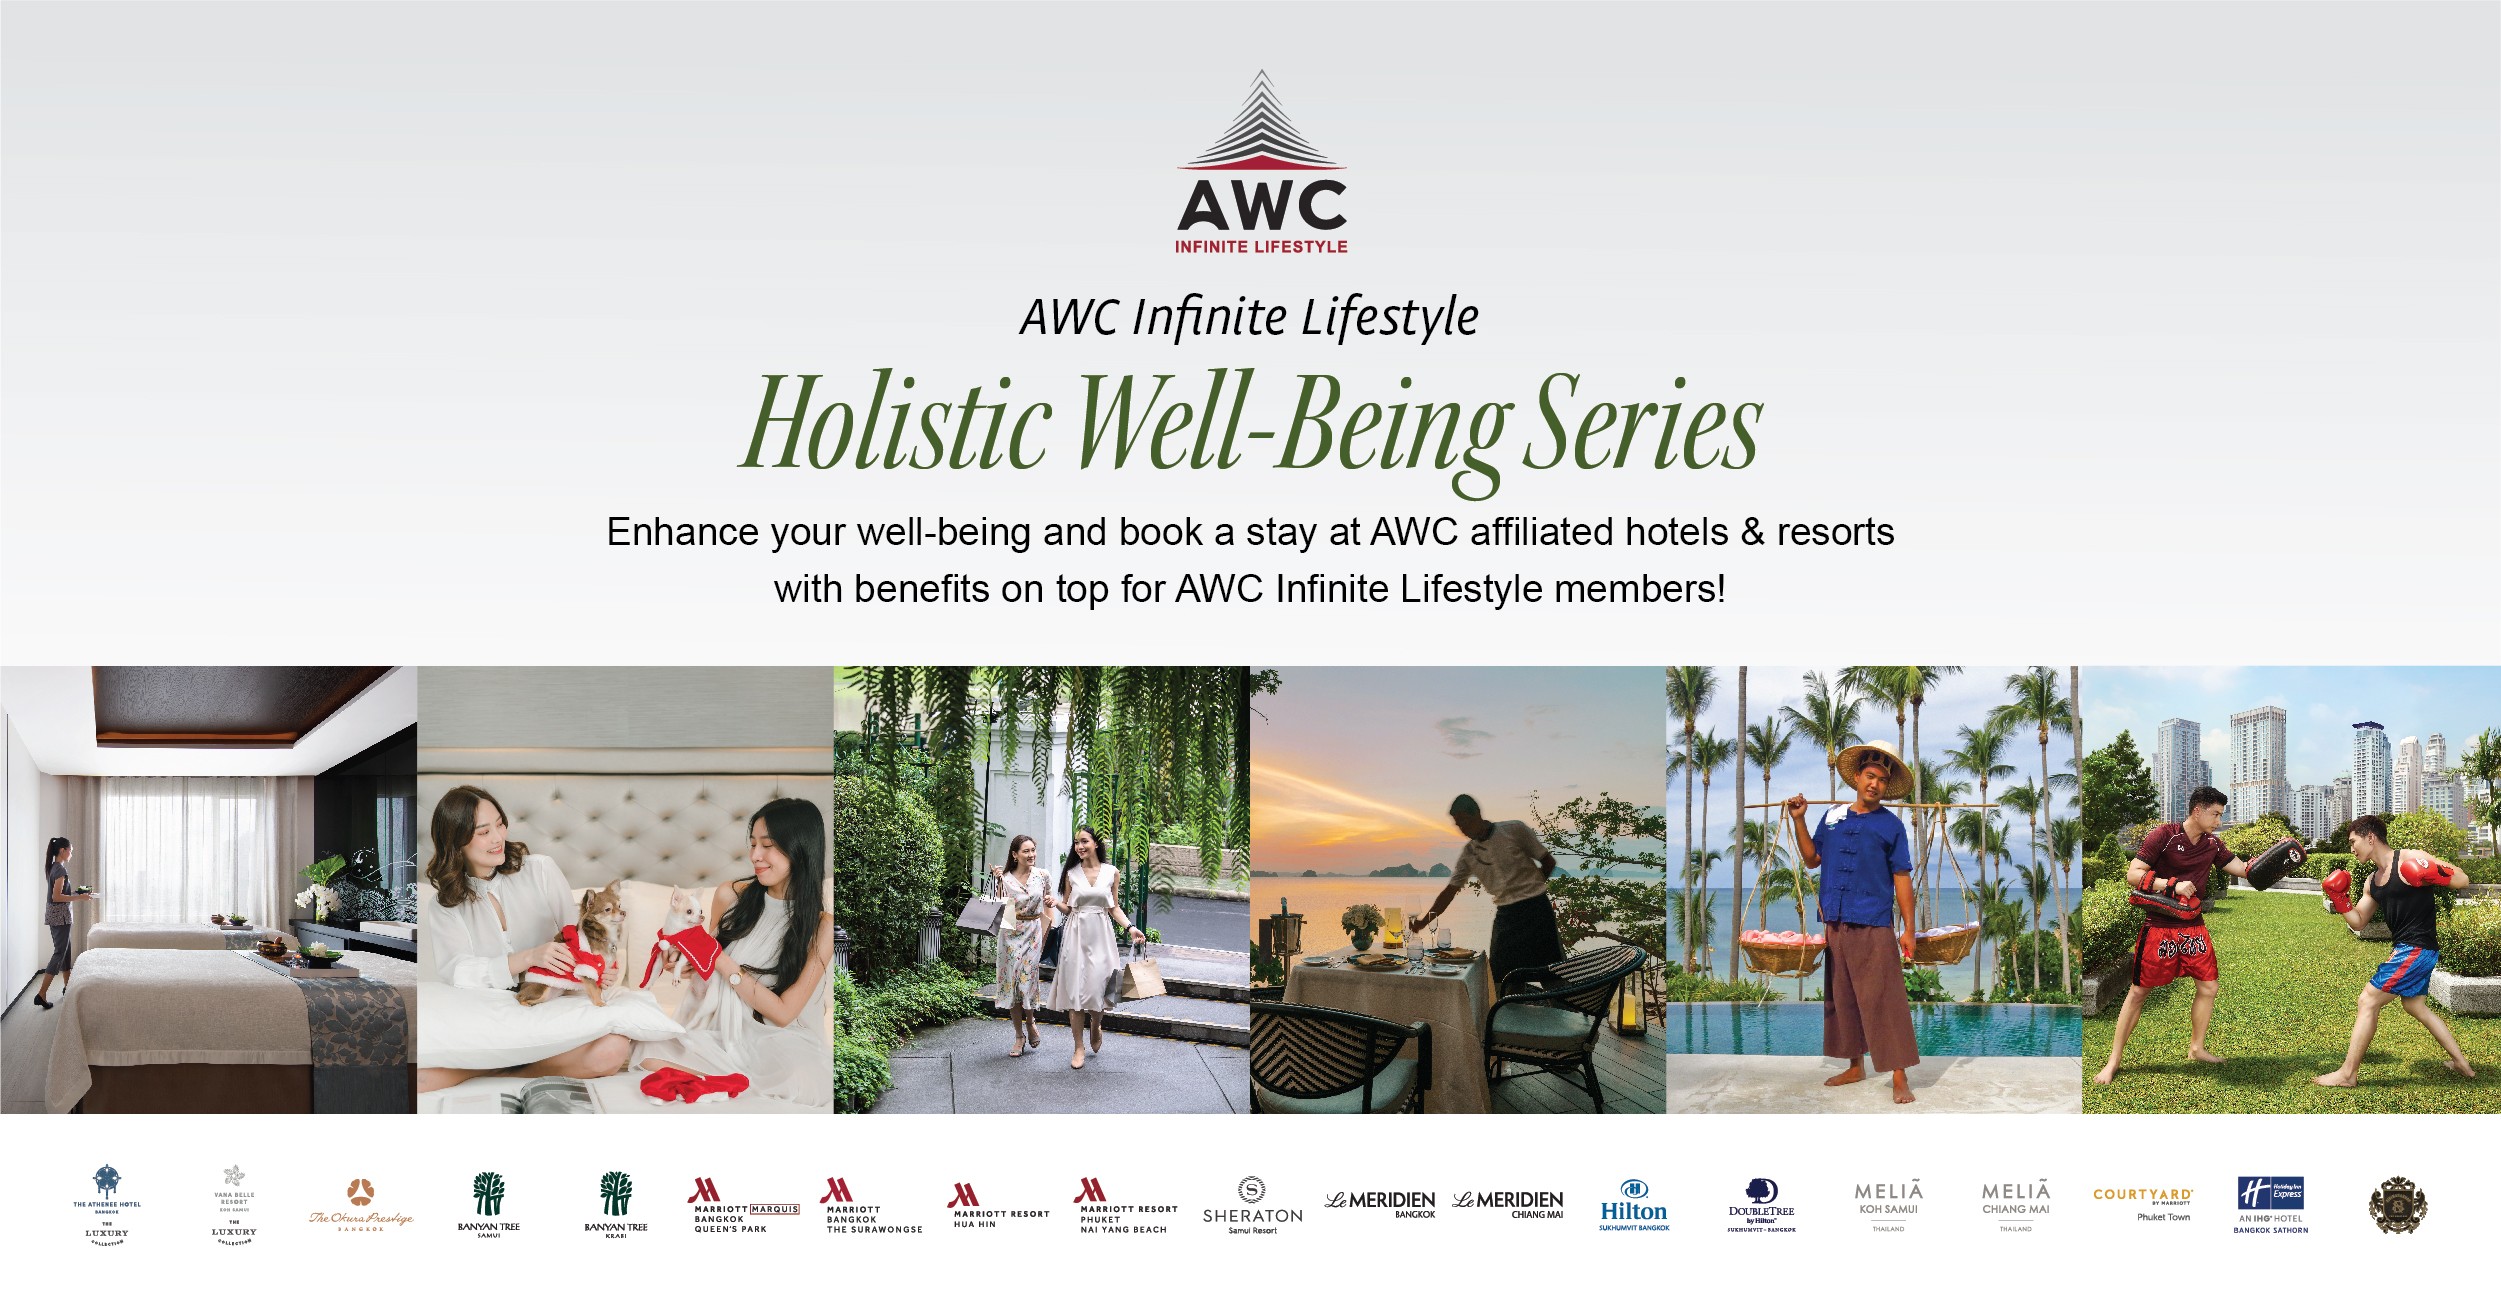 AWC Infinite Lifestyle Holistic Well-Being Series